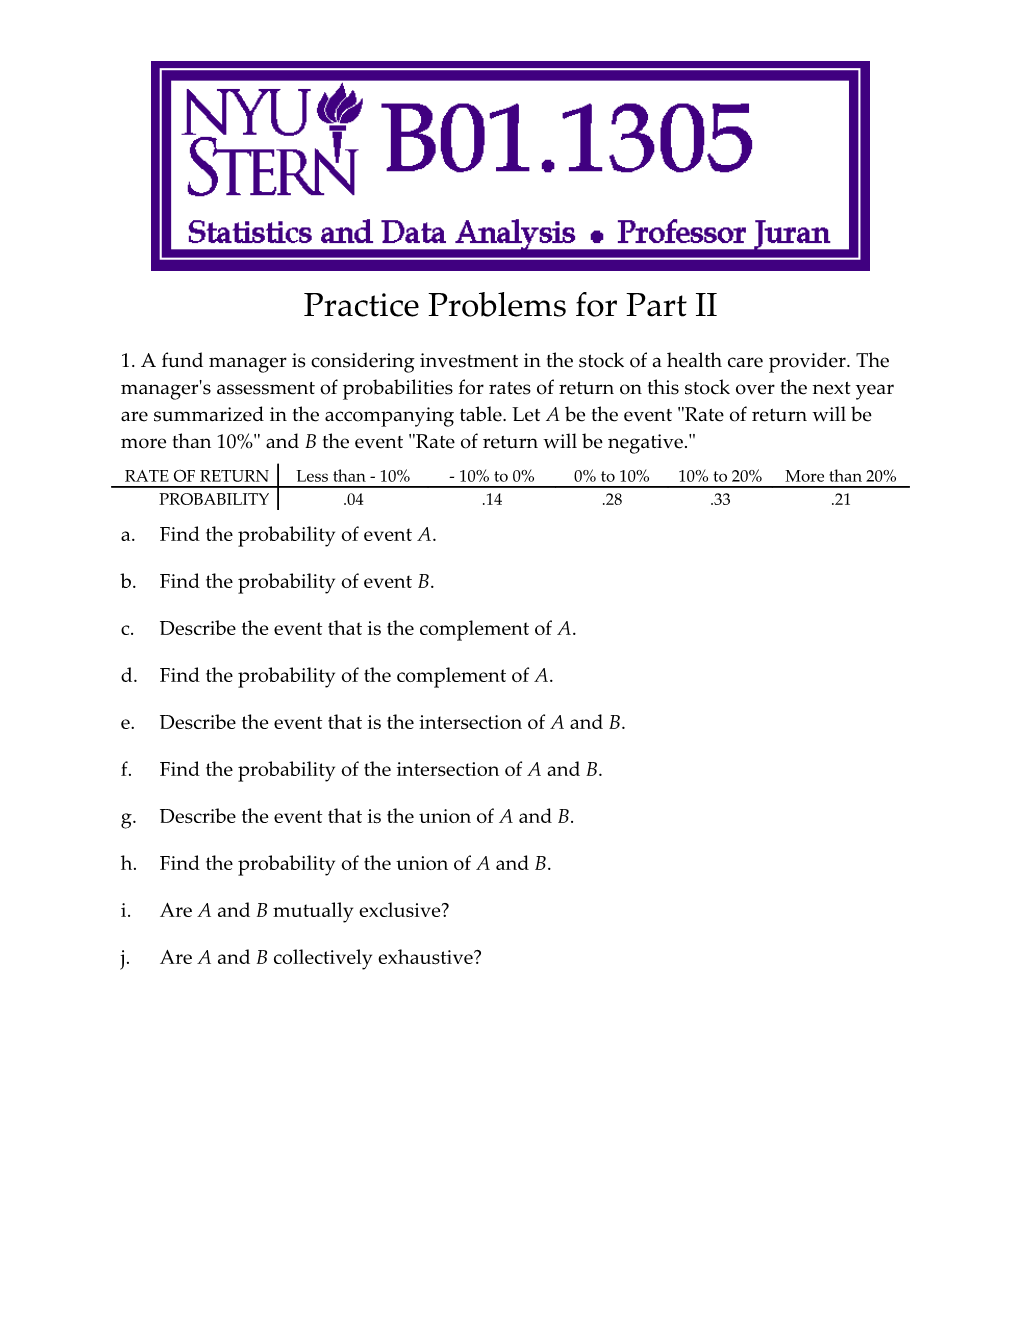 Practice Problems for Part II